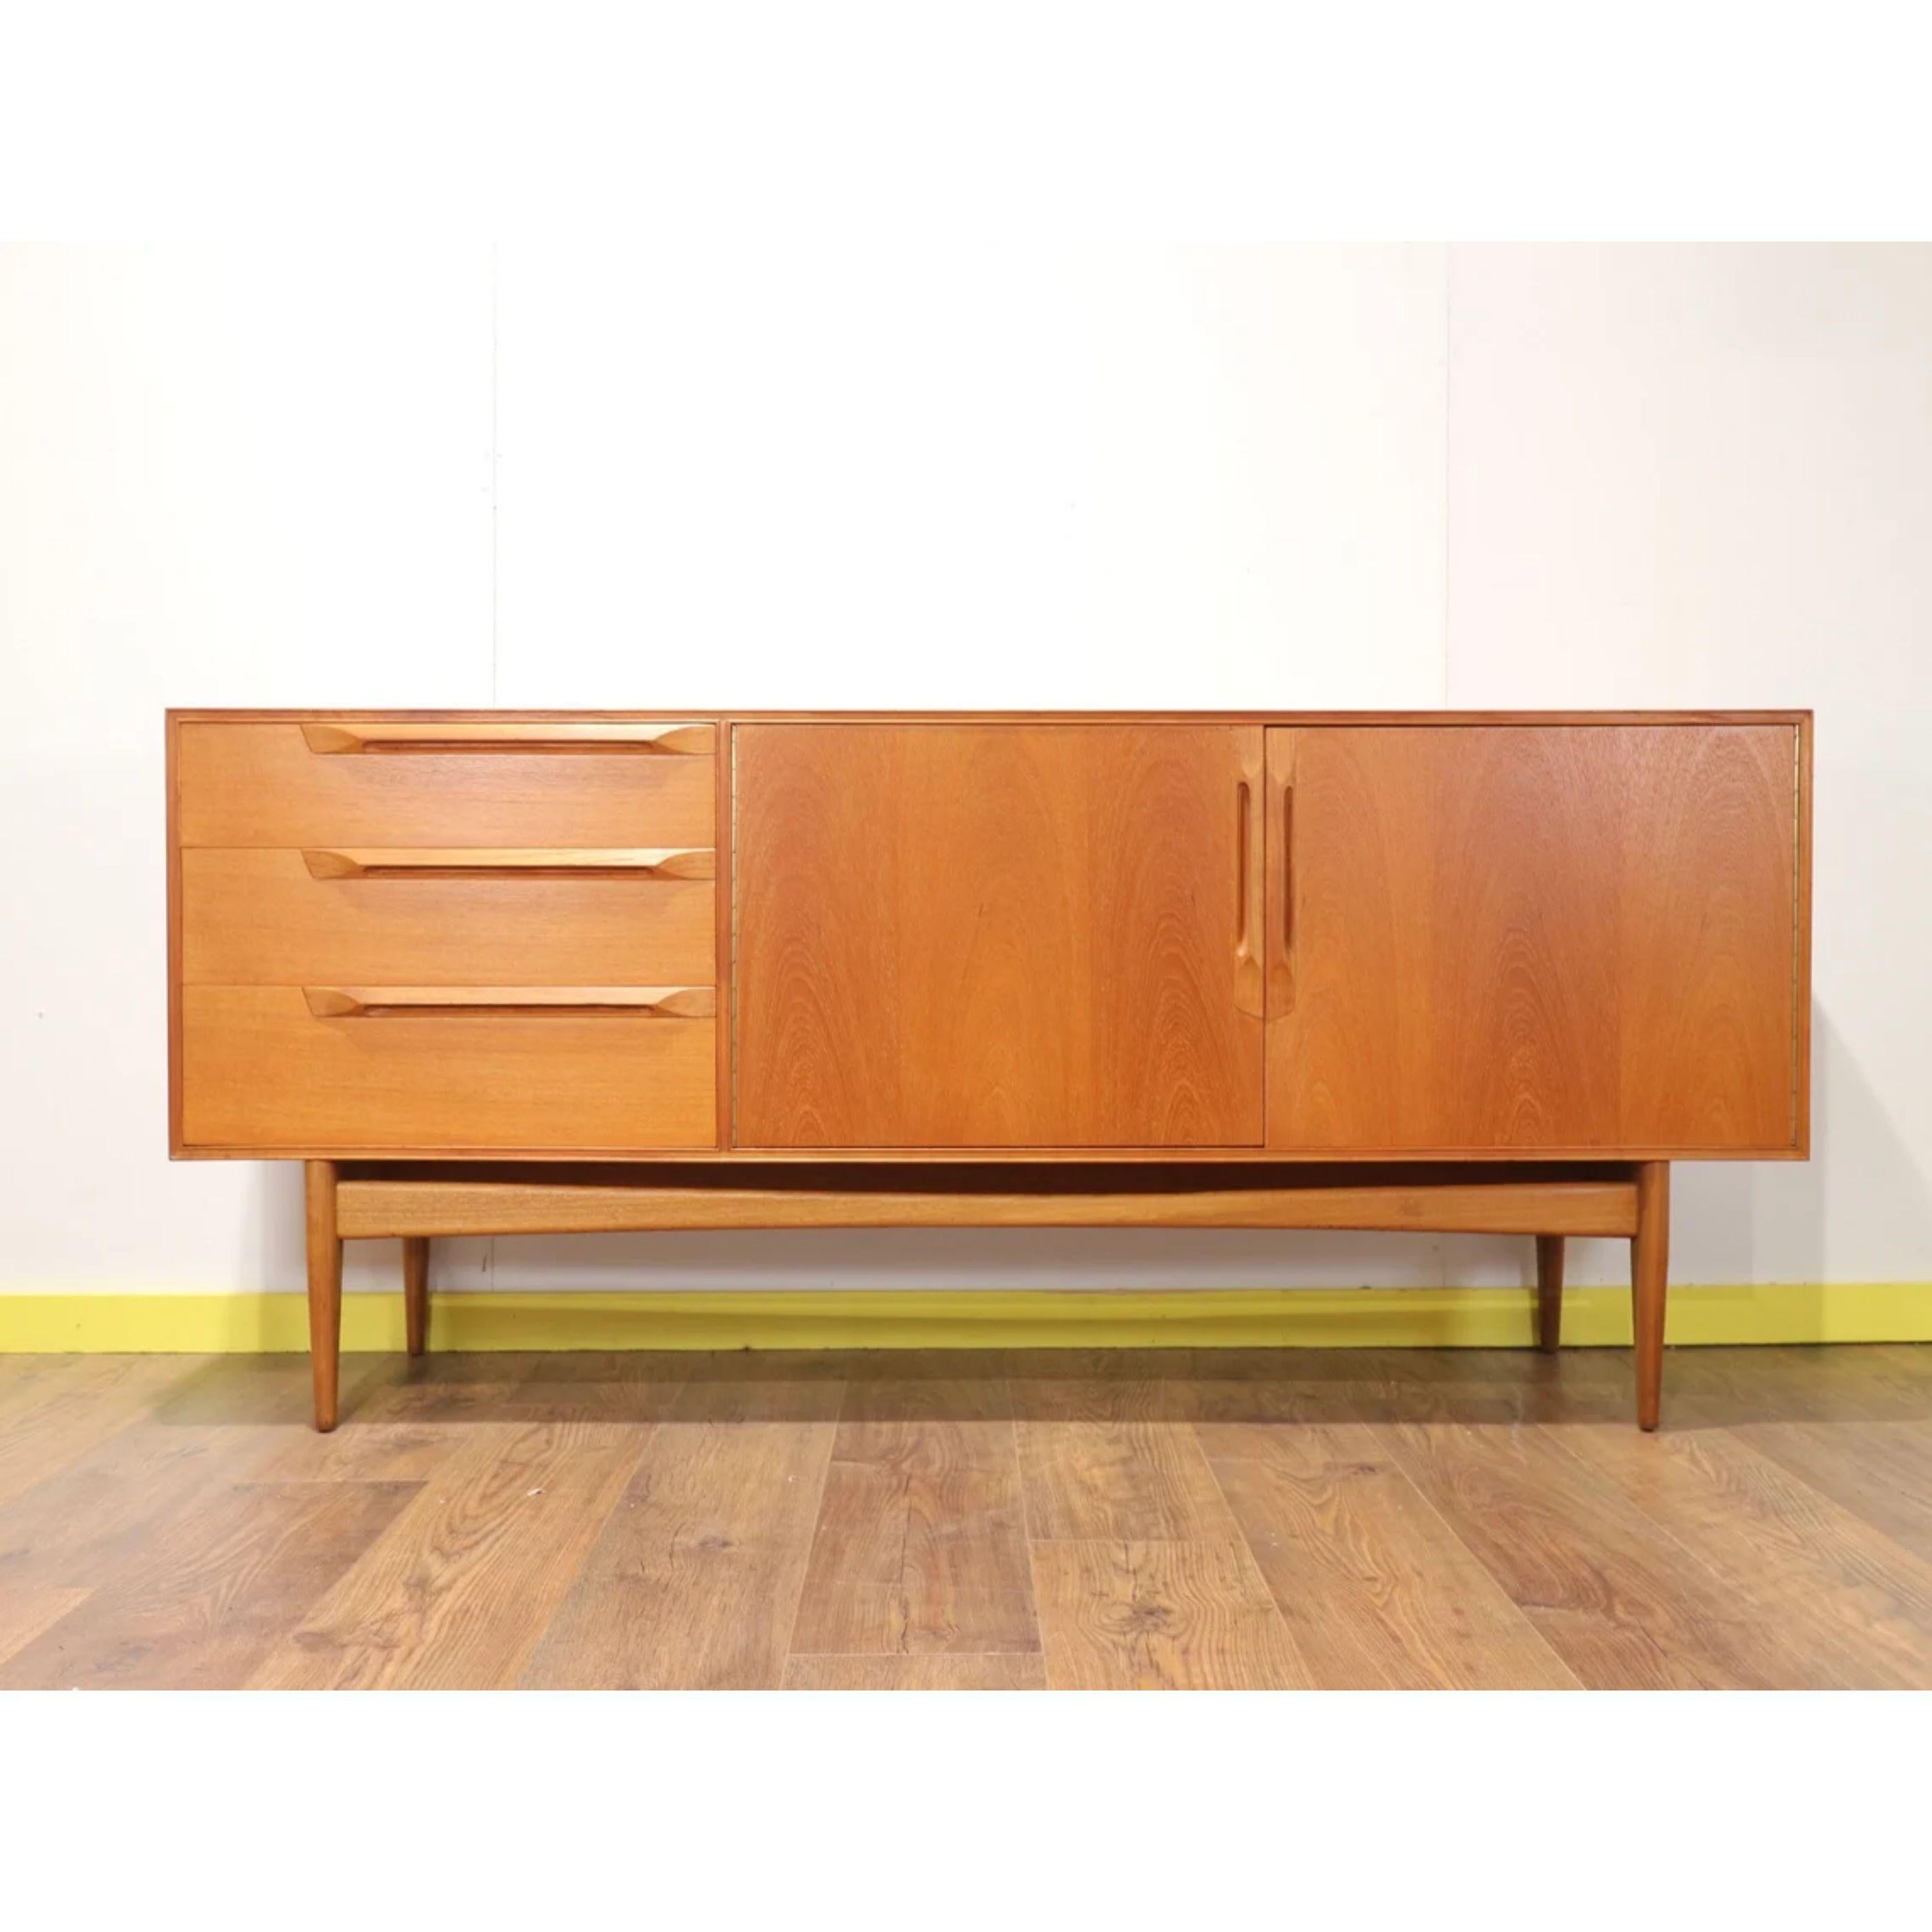 This rare model McIntosh Eden sideboard is a truly outstanding example of mid century design – elegant and beautiful. The bank of 3 drawers to left of this piece include a top drawer lined in black felt with cutlery dividers in place. The sleek,